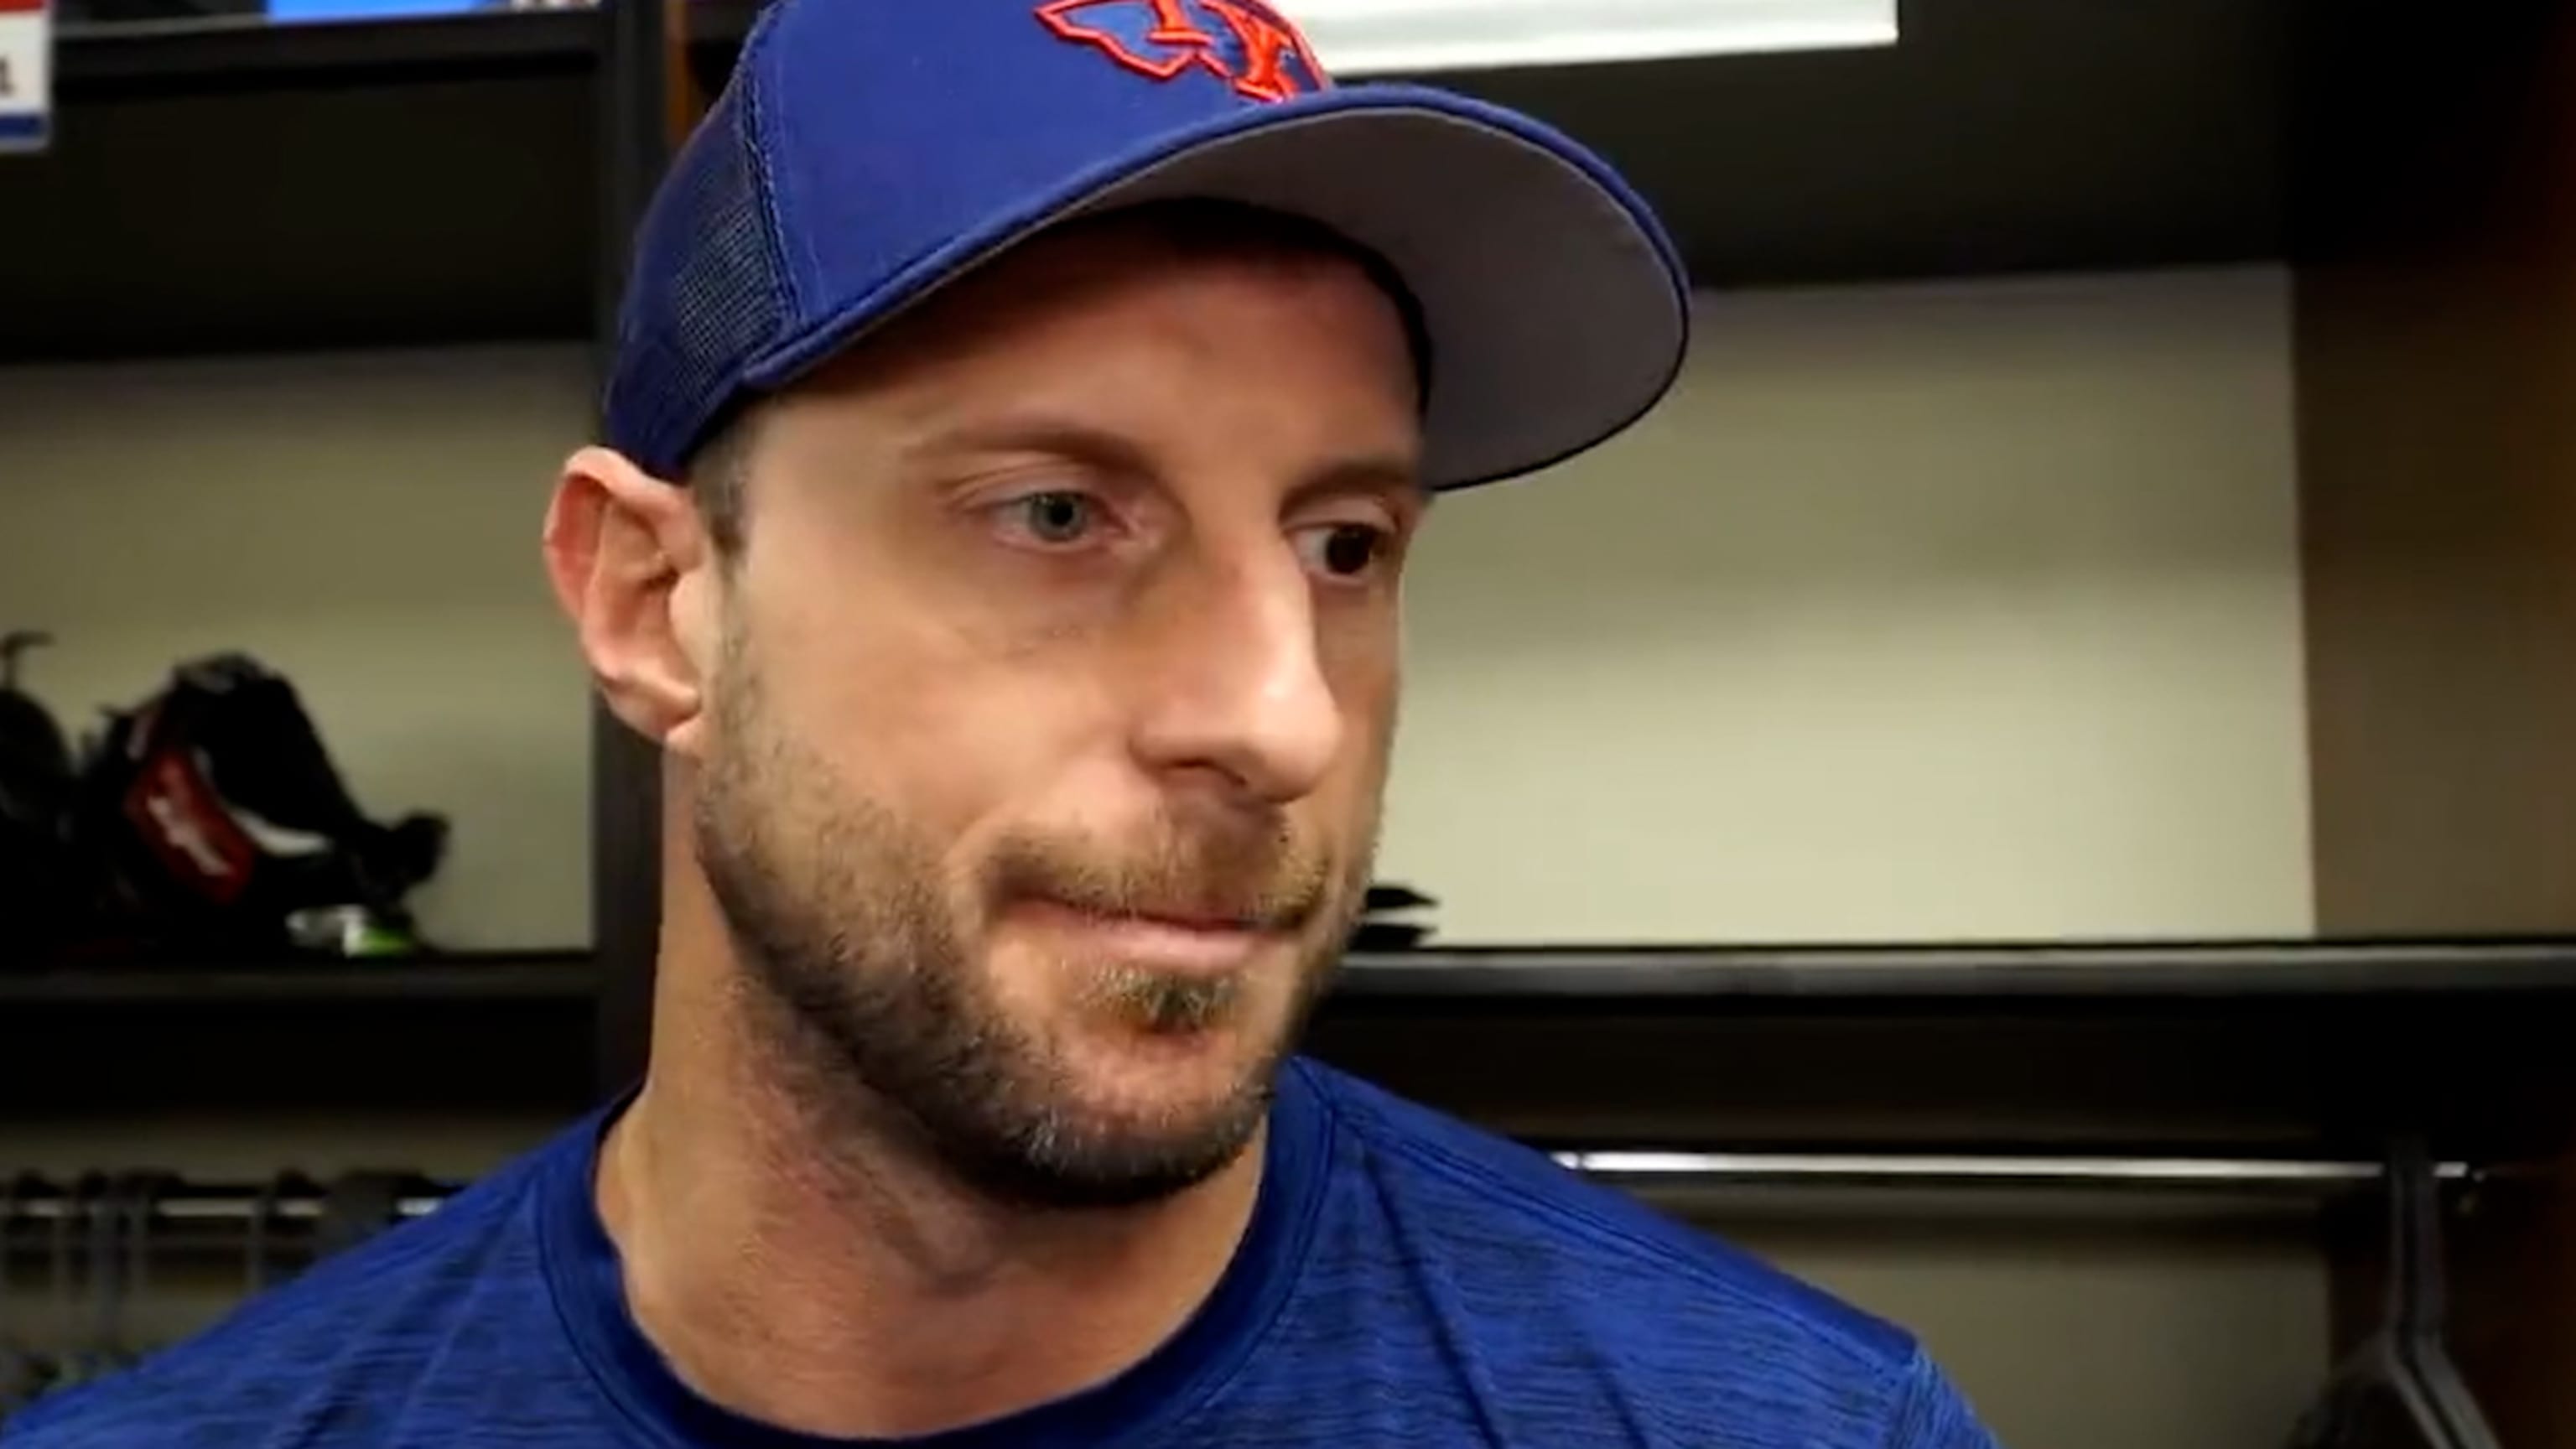 5 things fans may not know about Texas Rangers pitcher Max Scherzer,  including his 'sexy eye